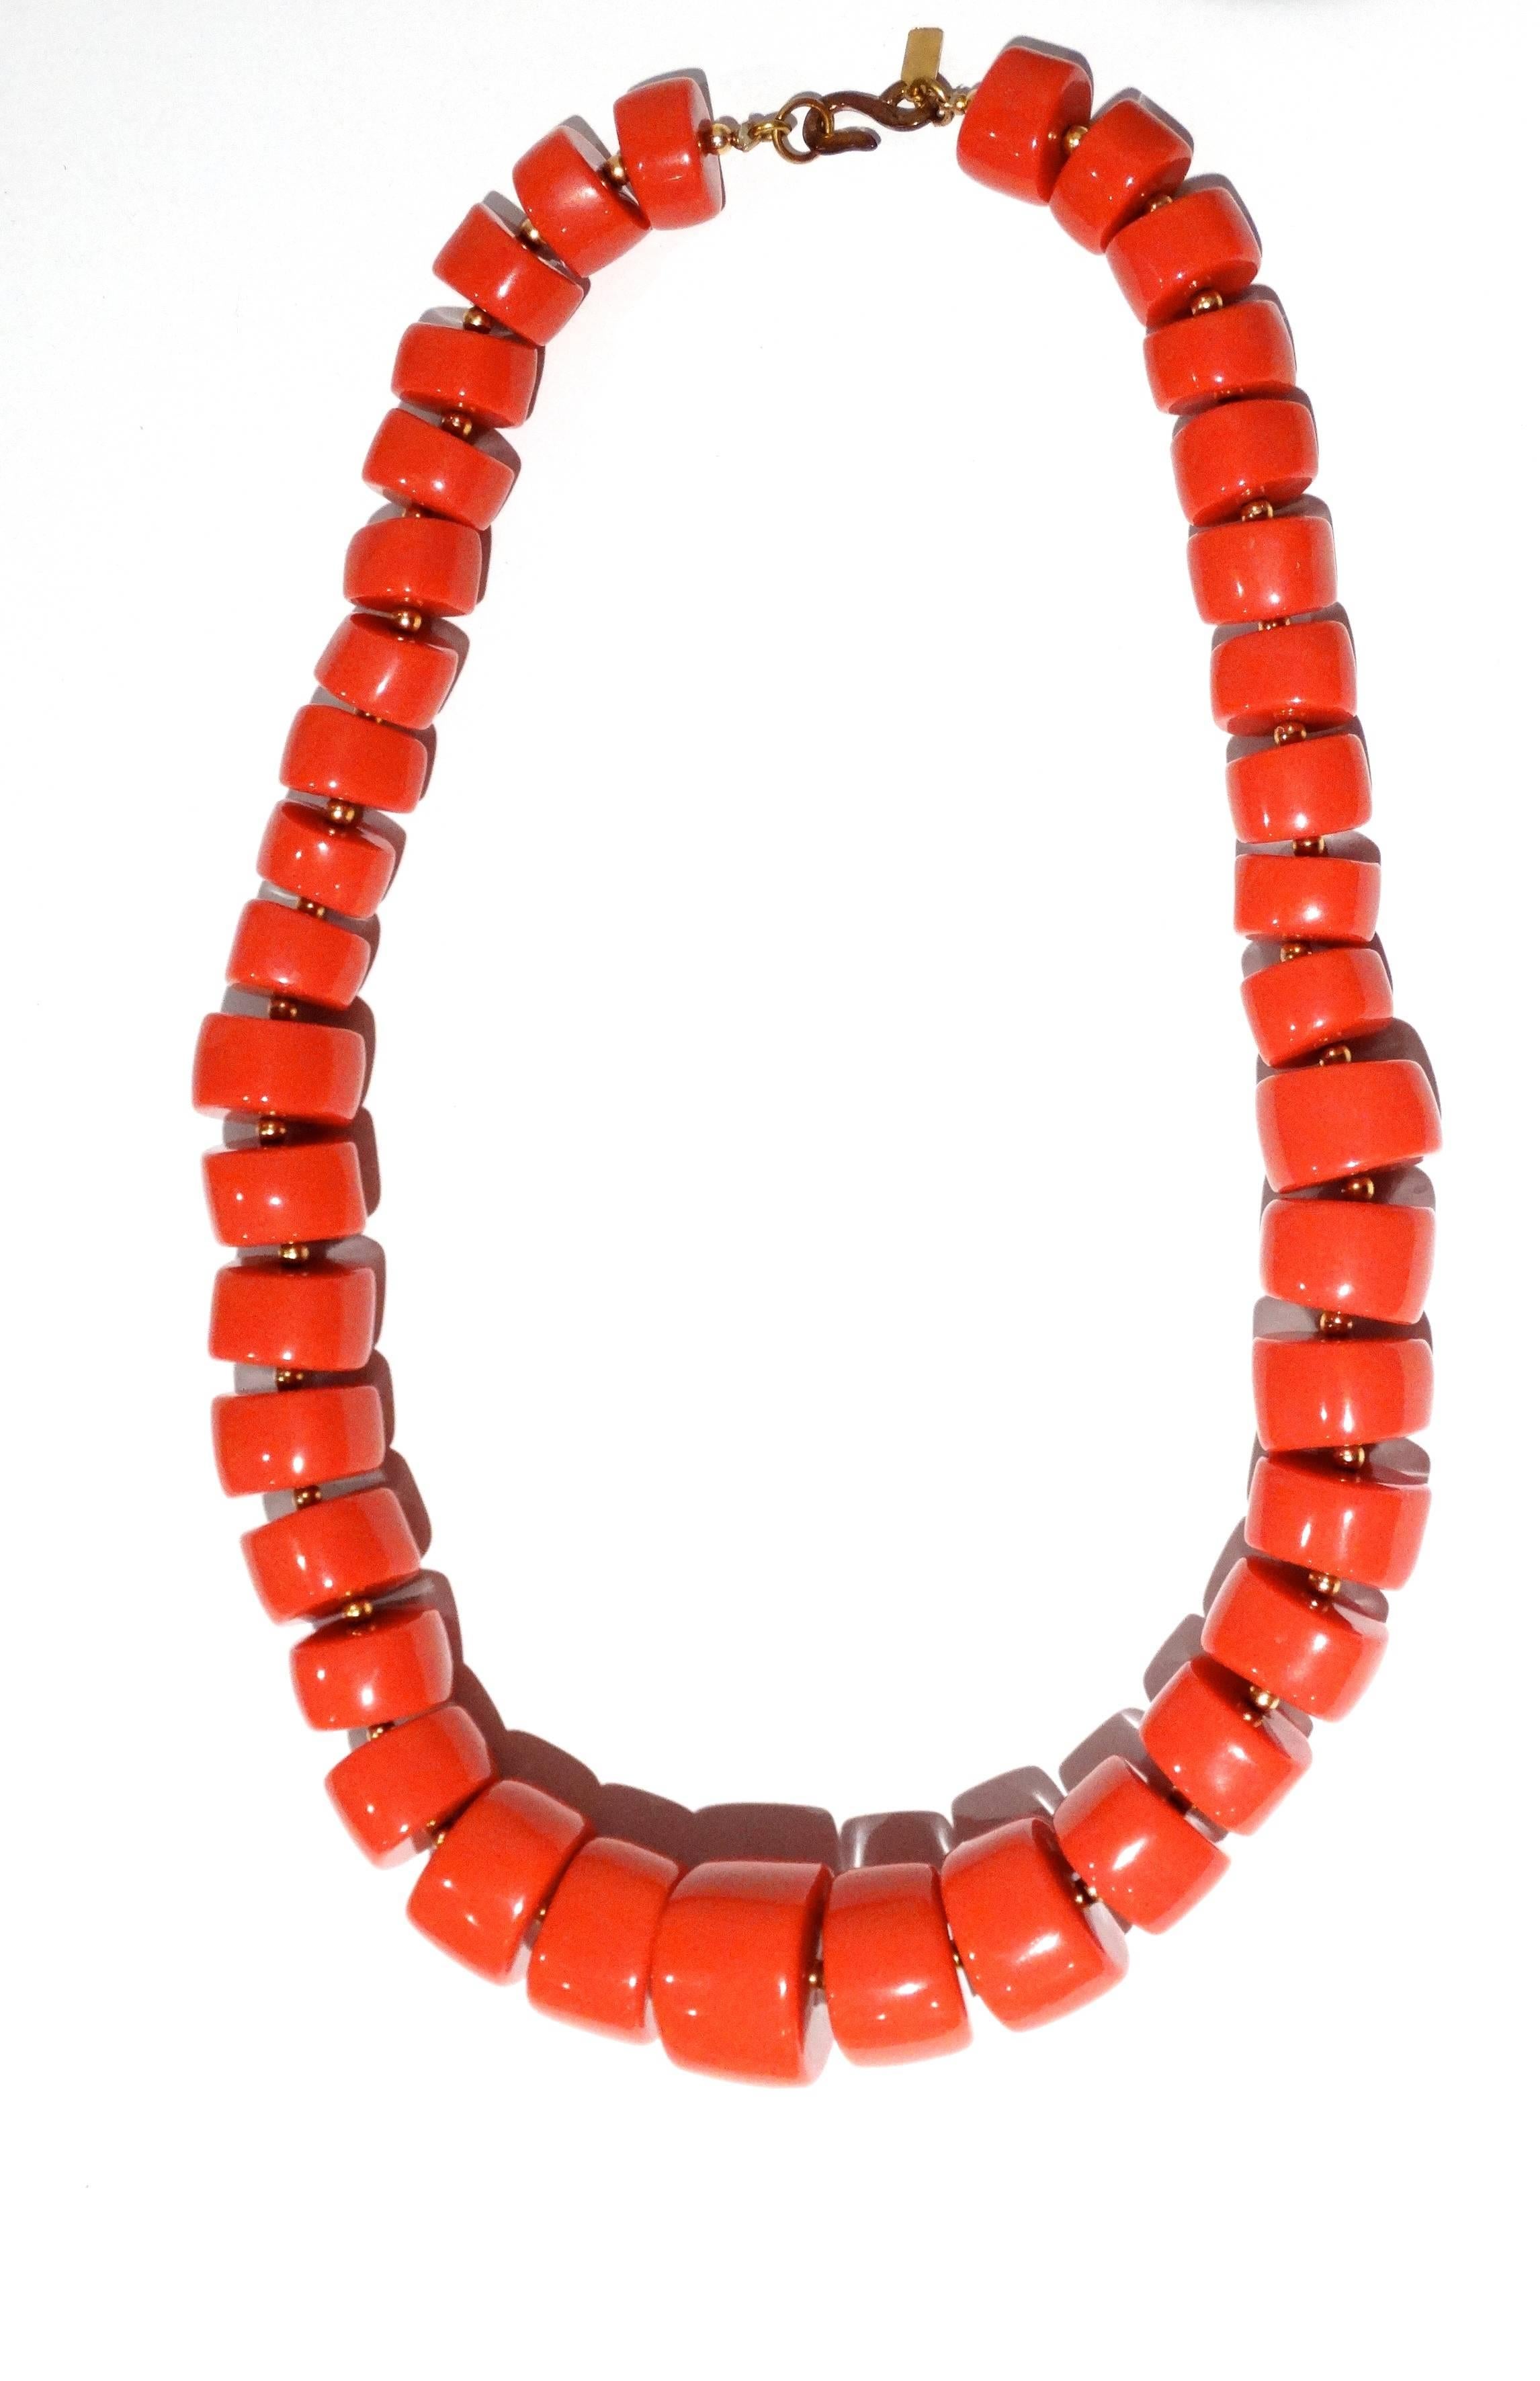 This is a big, bold, beaded necklace by Kenneth (Jay) Lane circa 1980's. The necklace consists of 40 small to large, smooth, solid coral colored resin beads, each measuring between 1/2 